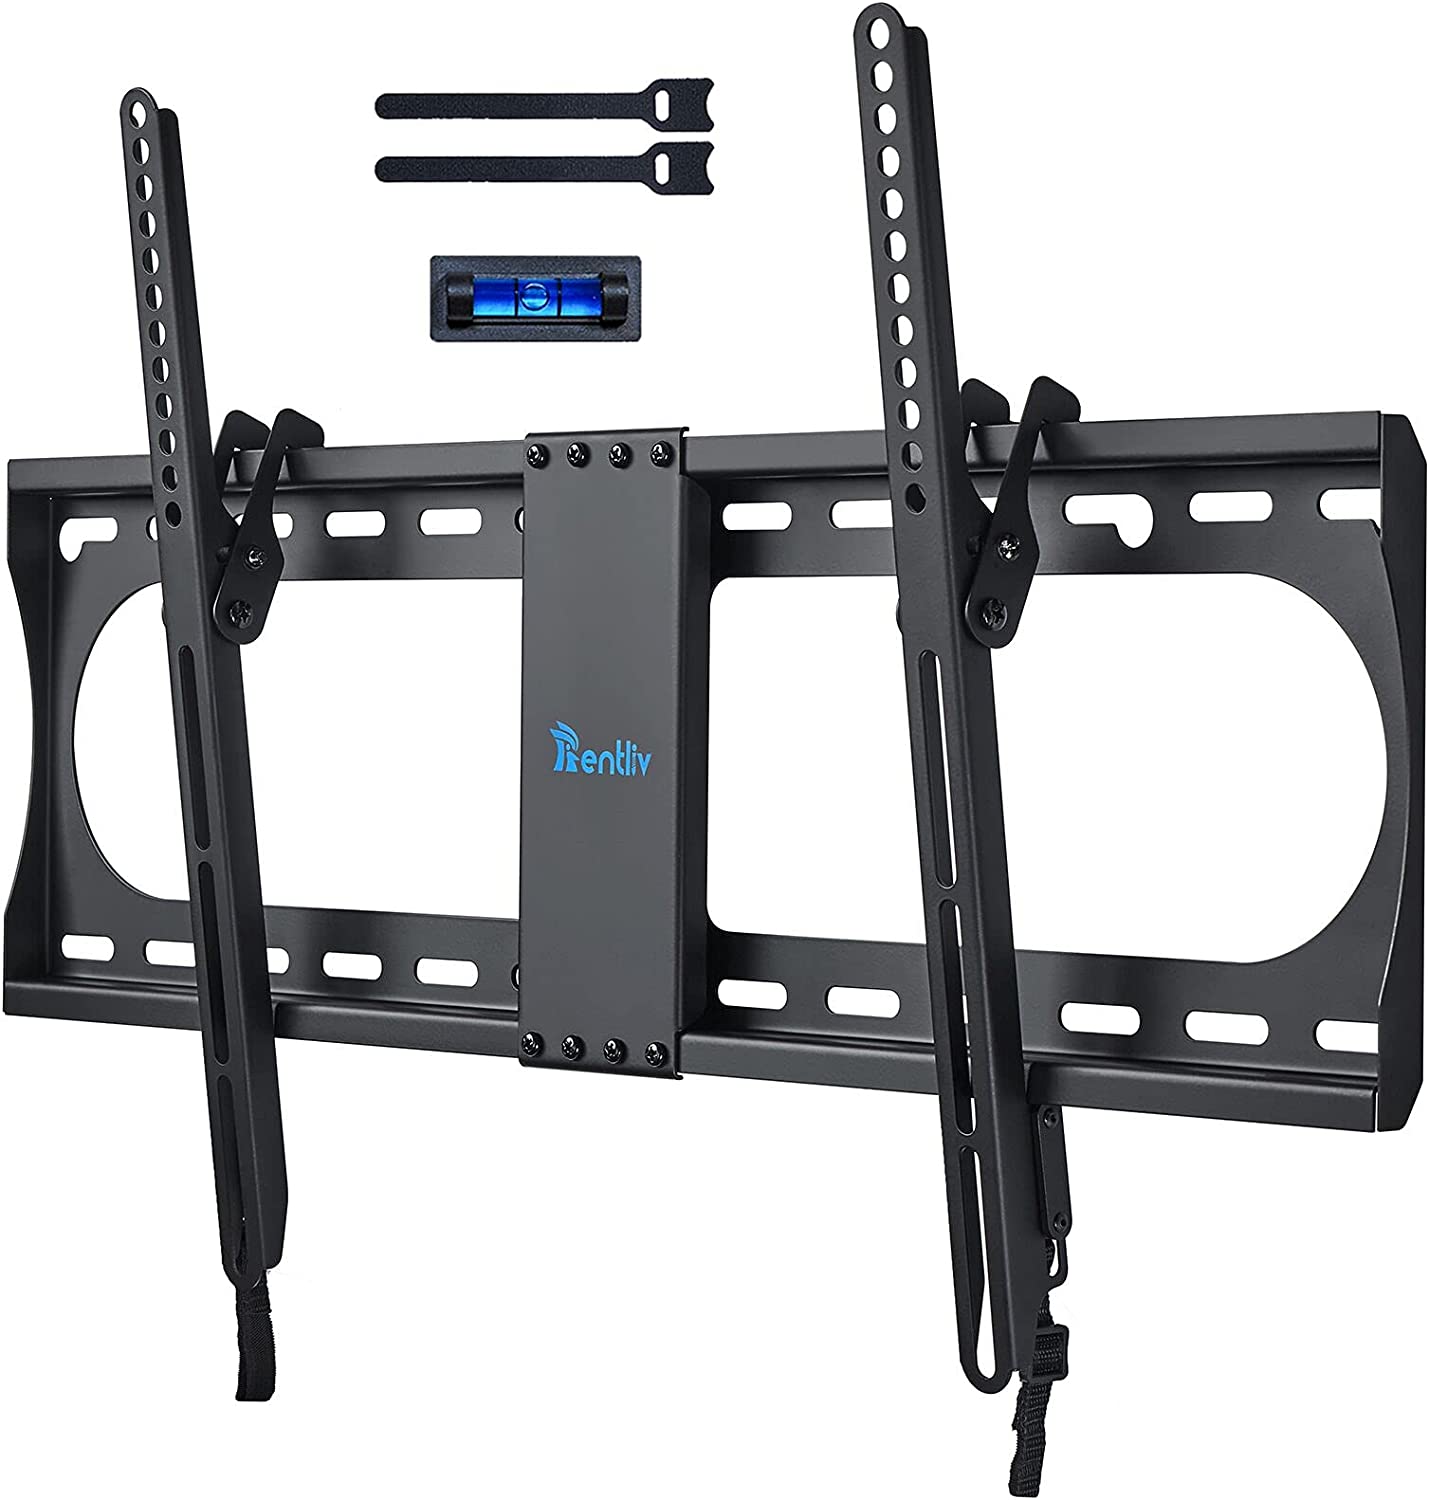 Tilt TV Wall Mount Stand for 37-70 inch Screen TV